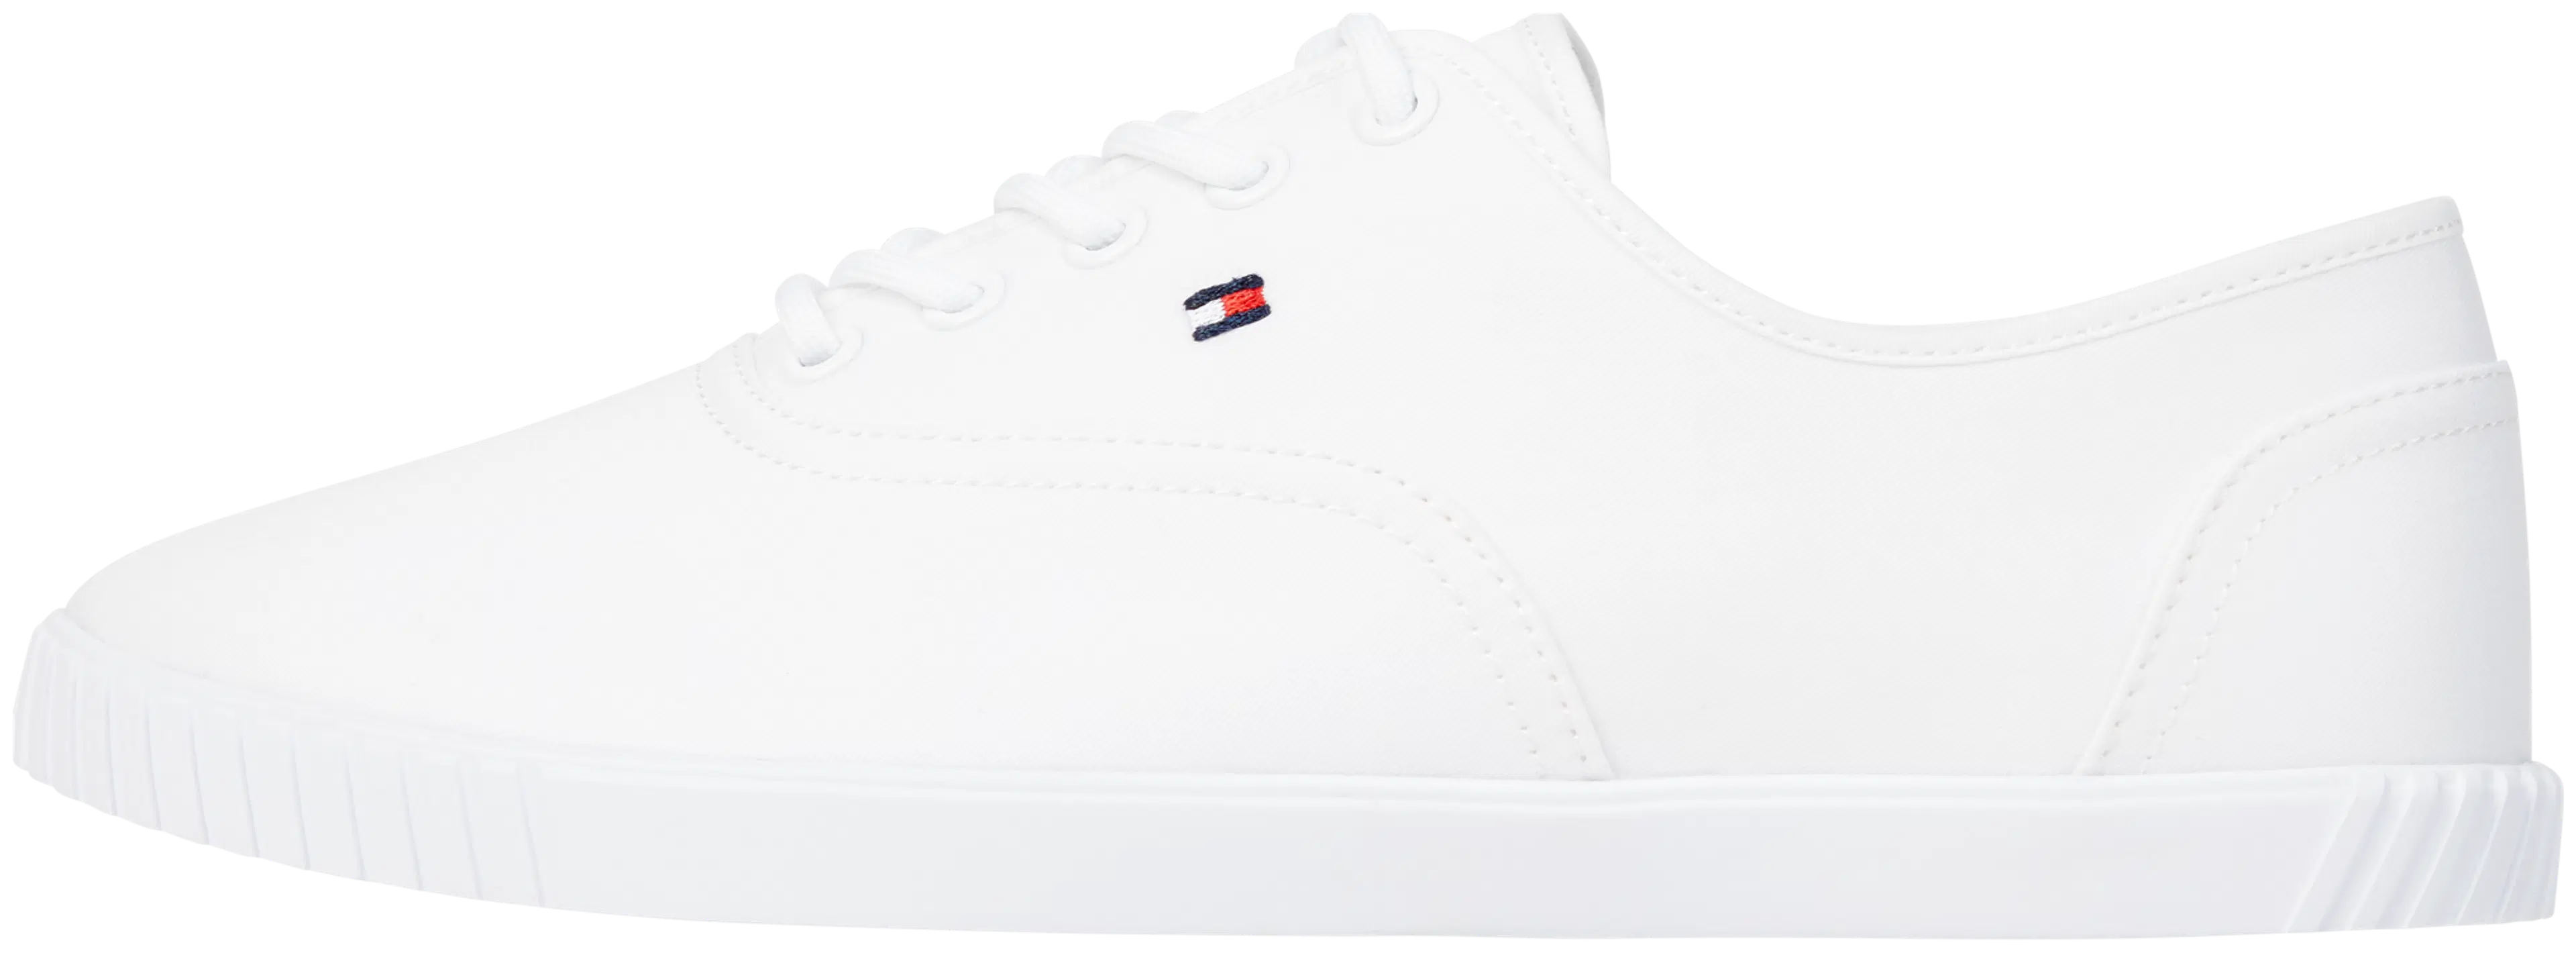 Tommy Hilfiger Canvas Lace Up tennarit